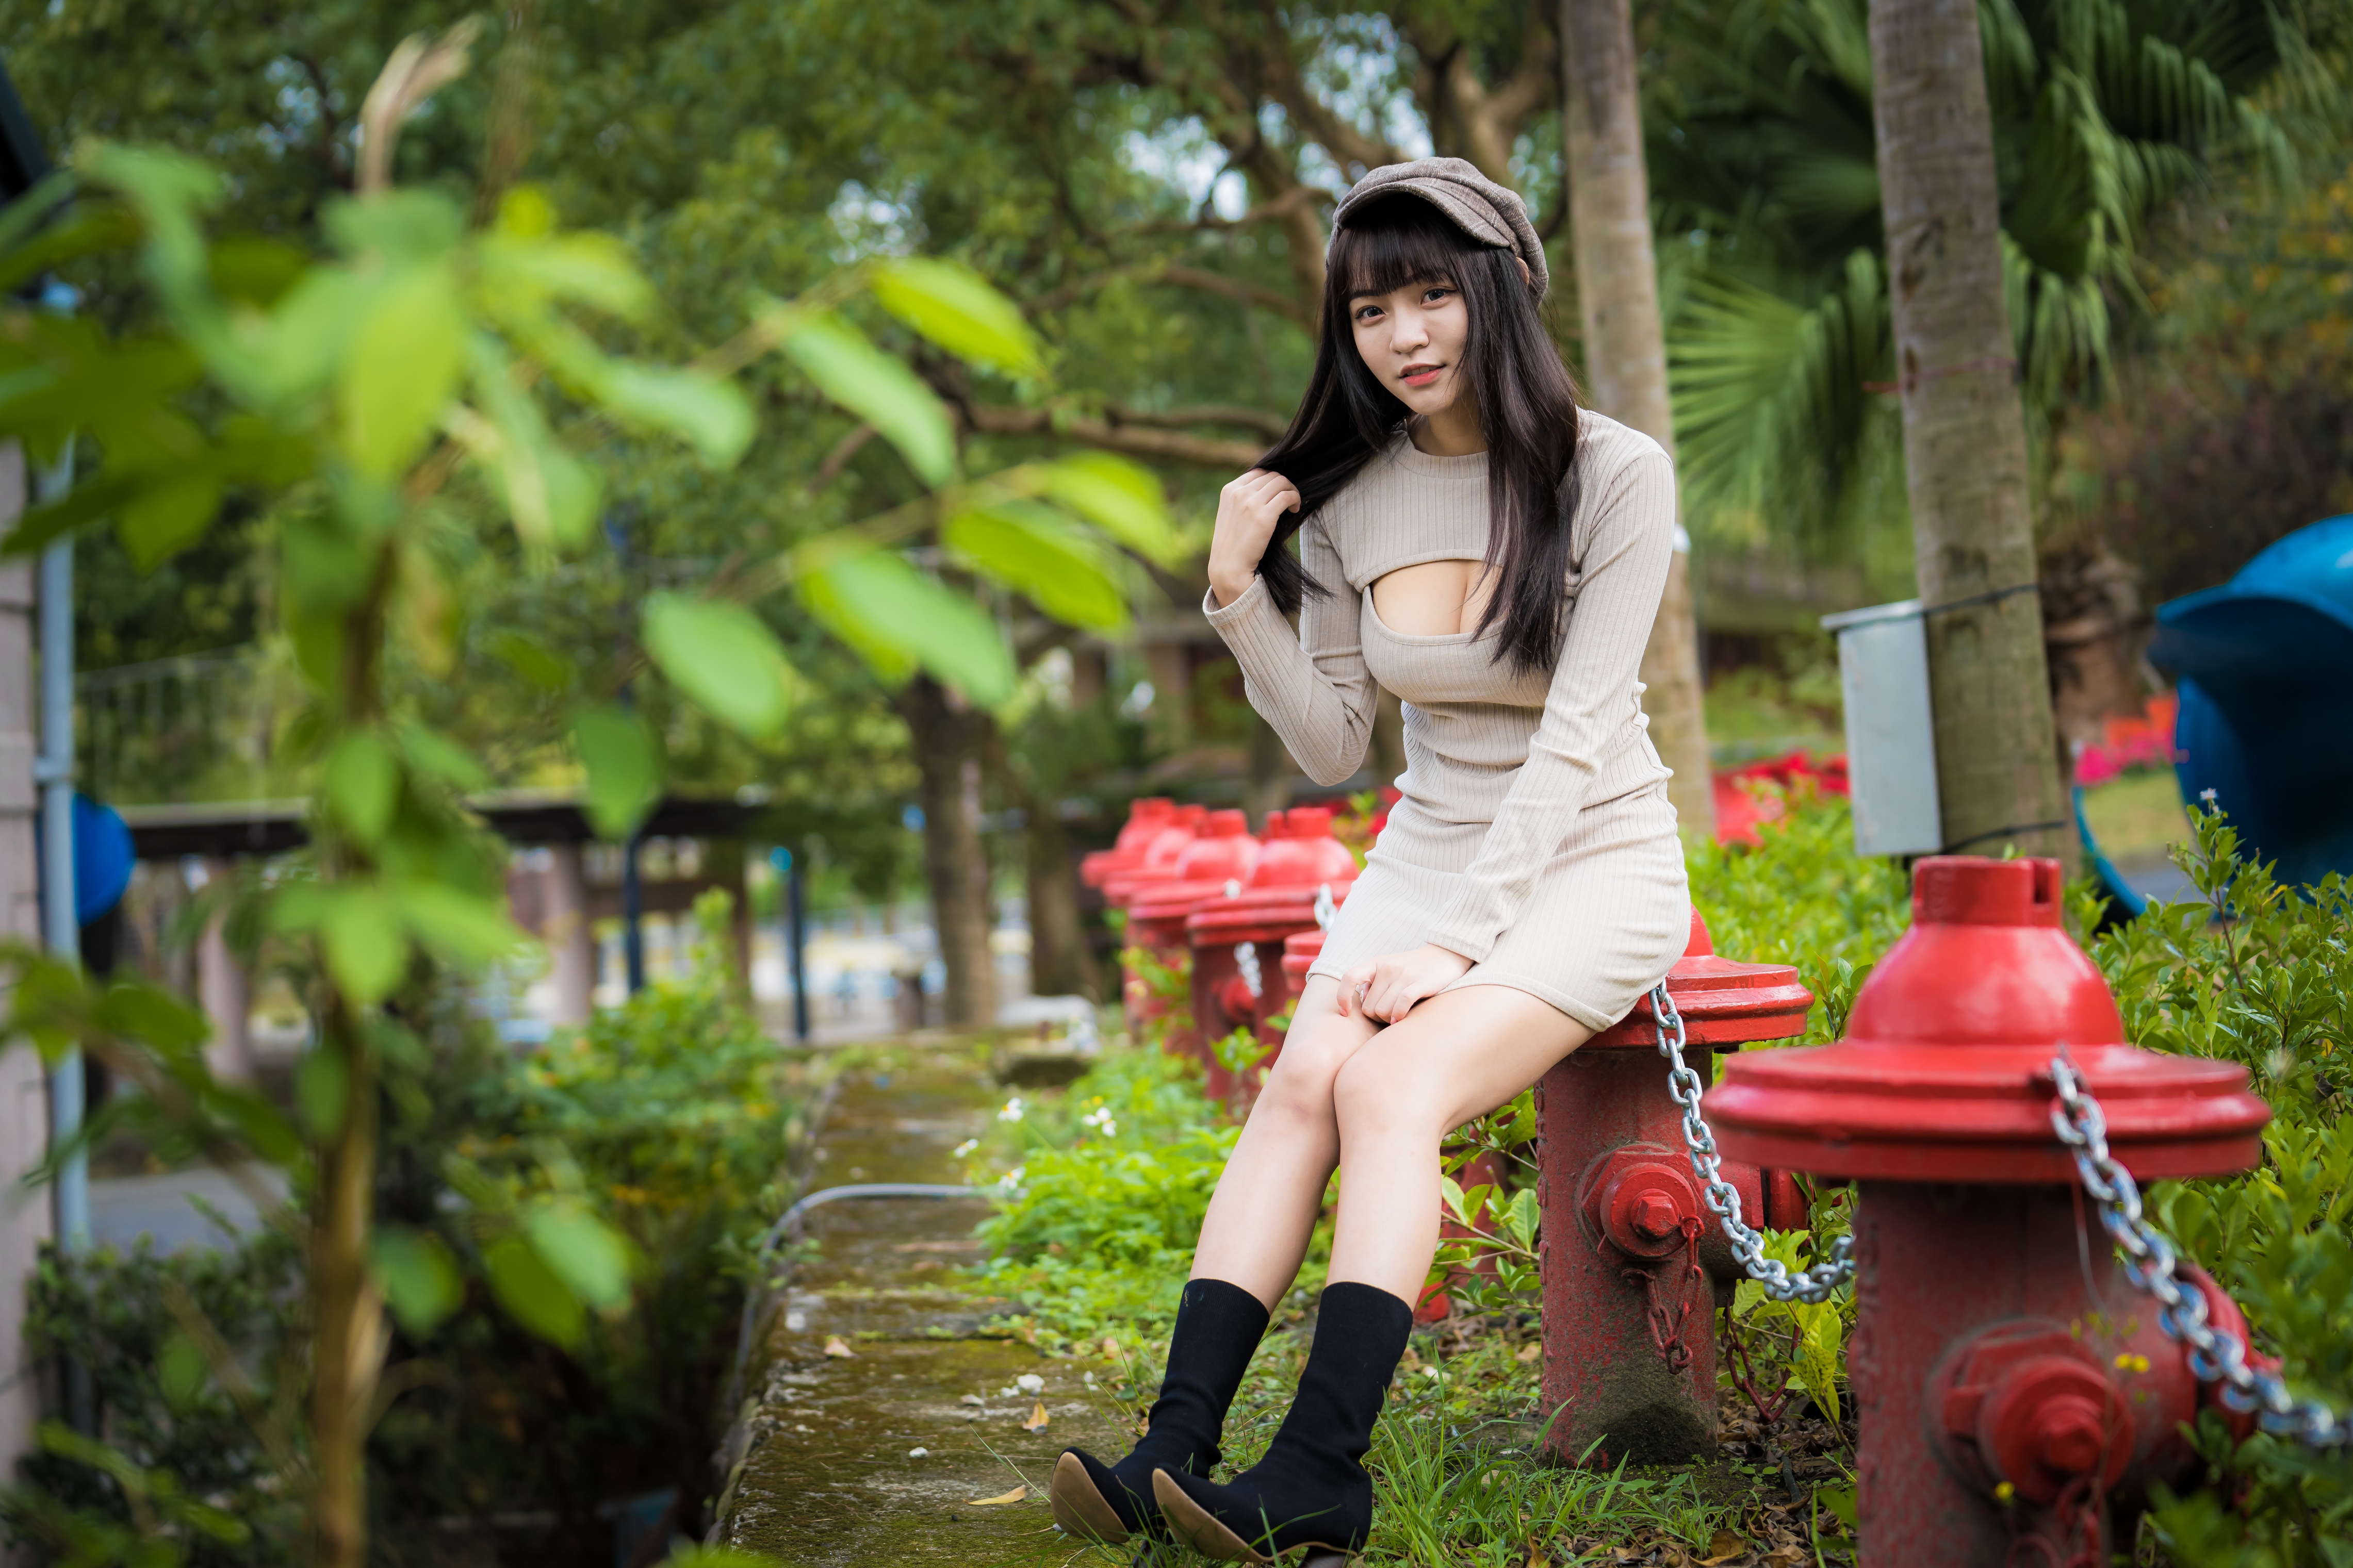 Asian Model Women Long Hair Berets Grey Dress Shoes Sitting Leaves Branch Trees Grass Chains Depth O 4562x3041